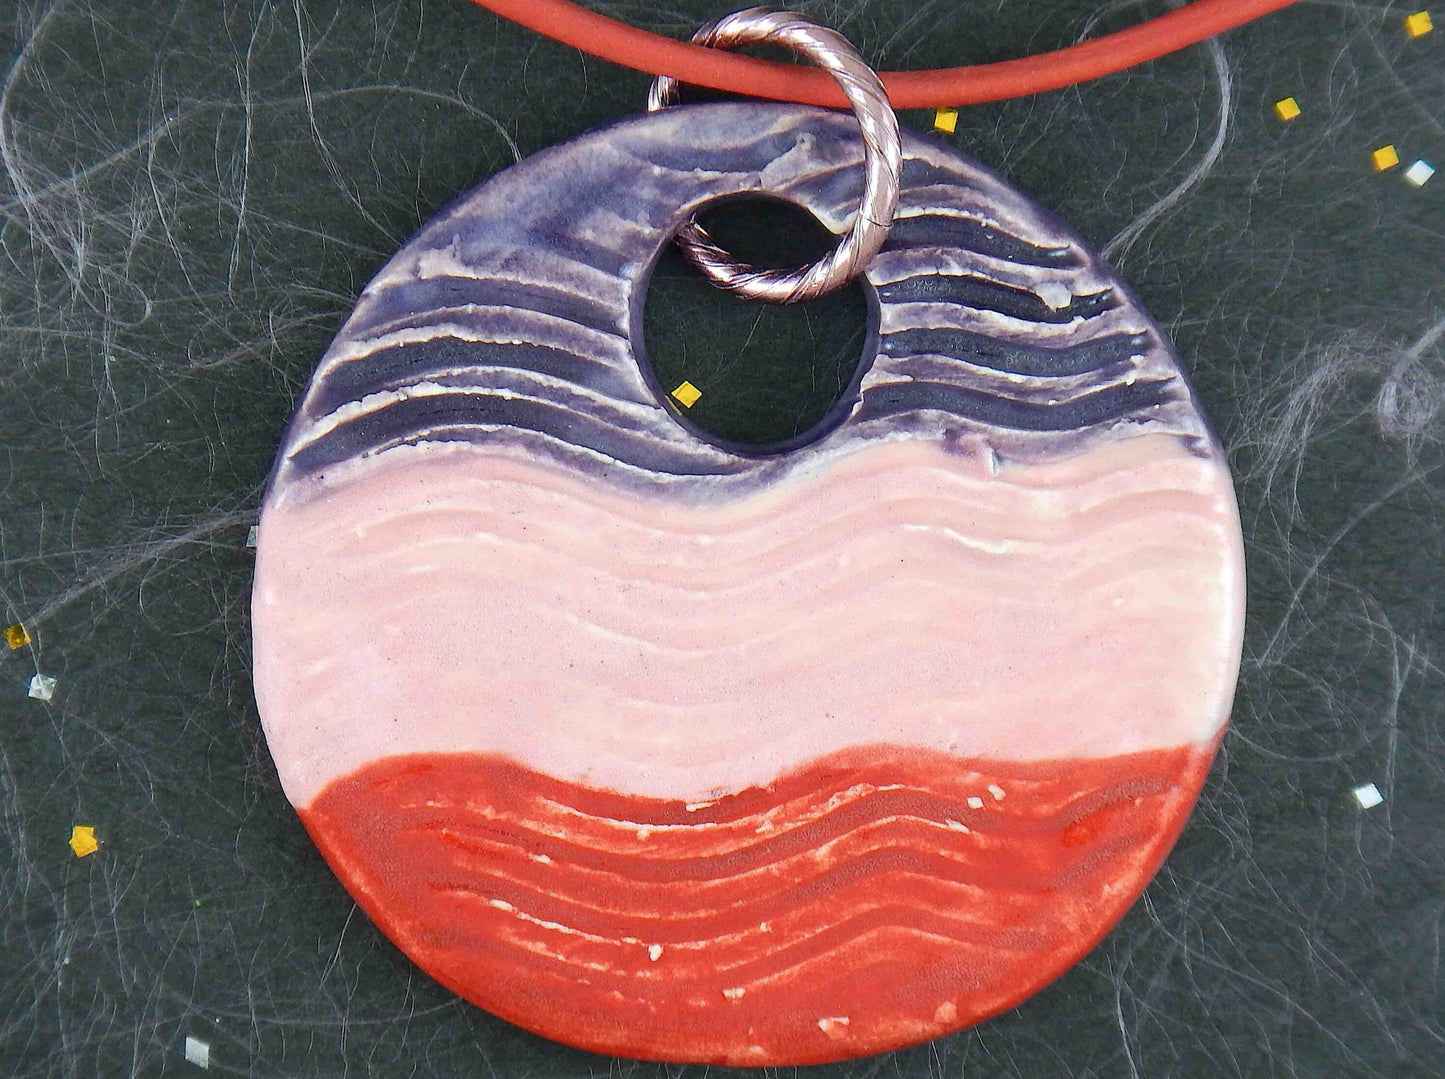 16-inch necklace with large round wavy ceramic pendant medallion handmade in Montreal in violet-pink-red, red leather cord, aluminum ring, stainless steel clasp